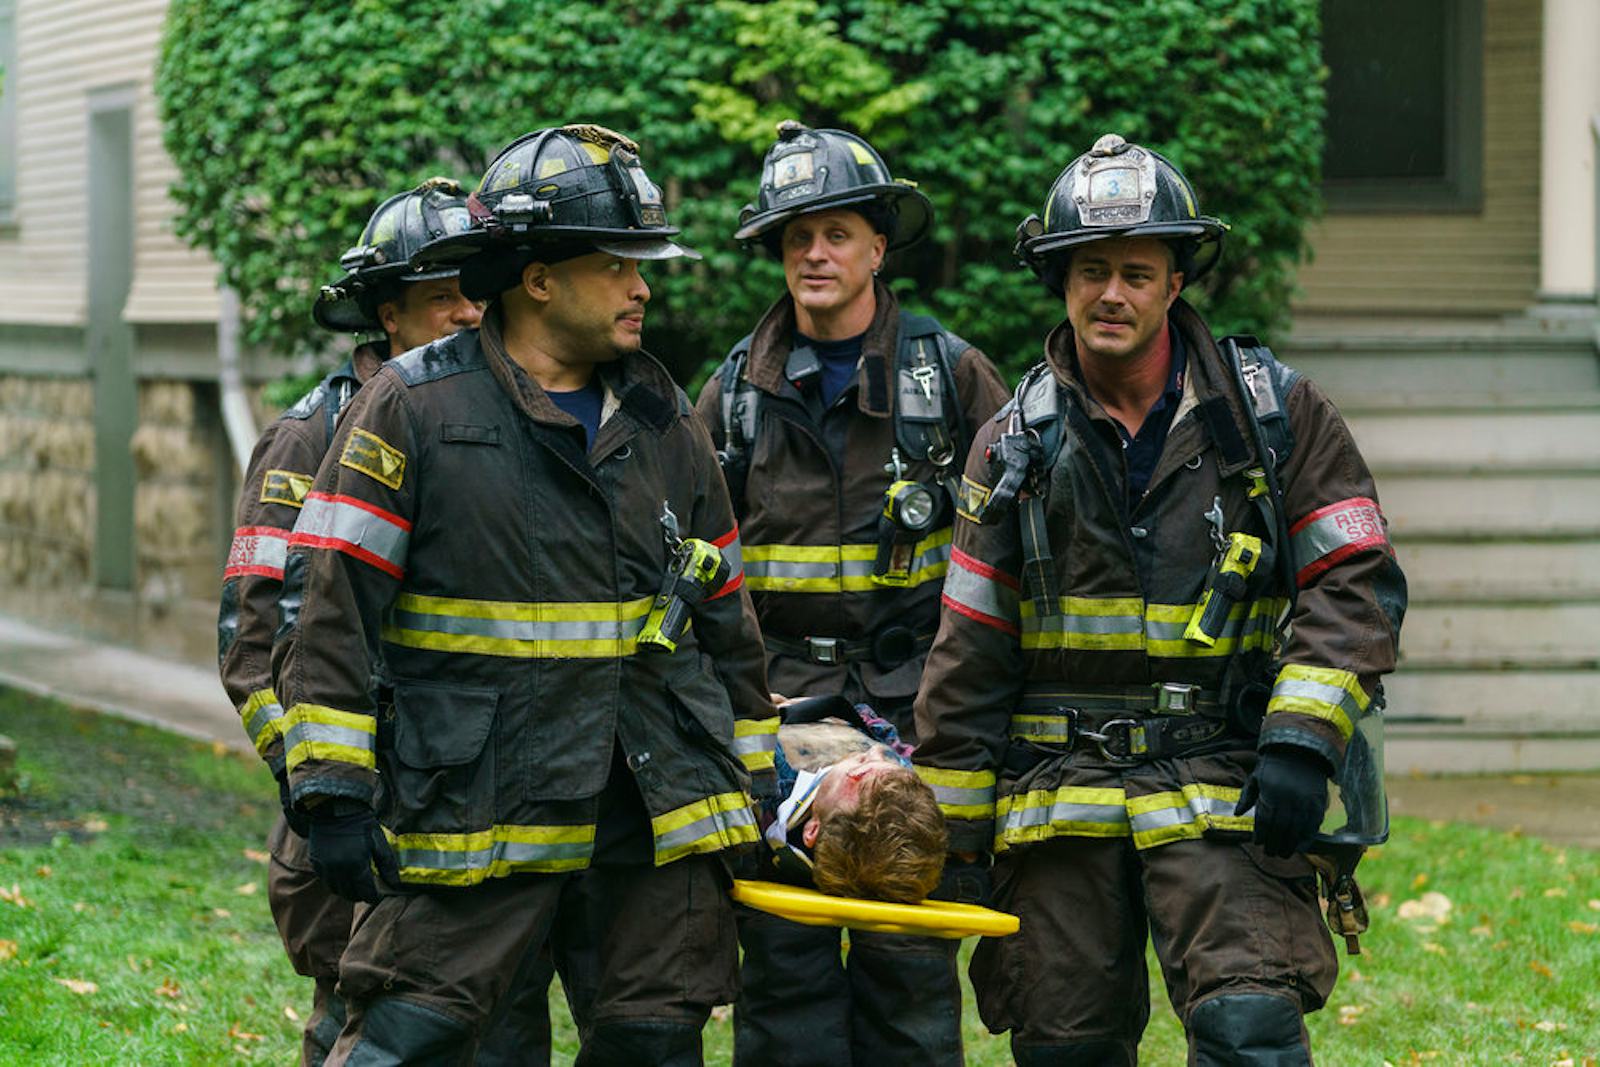 When Does 'Chicago Fire' Return From Hiatus? This Winter More Drama Is